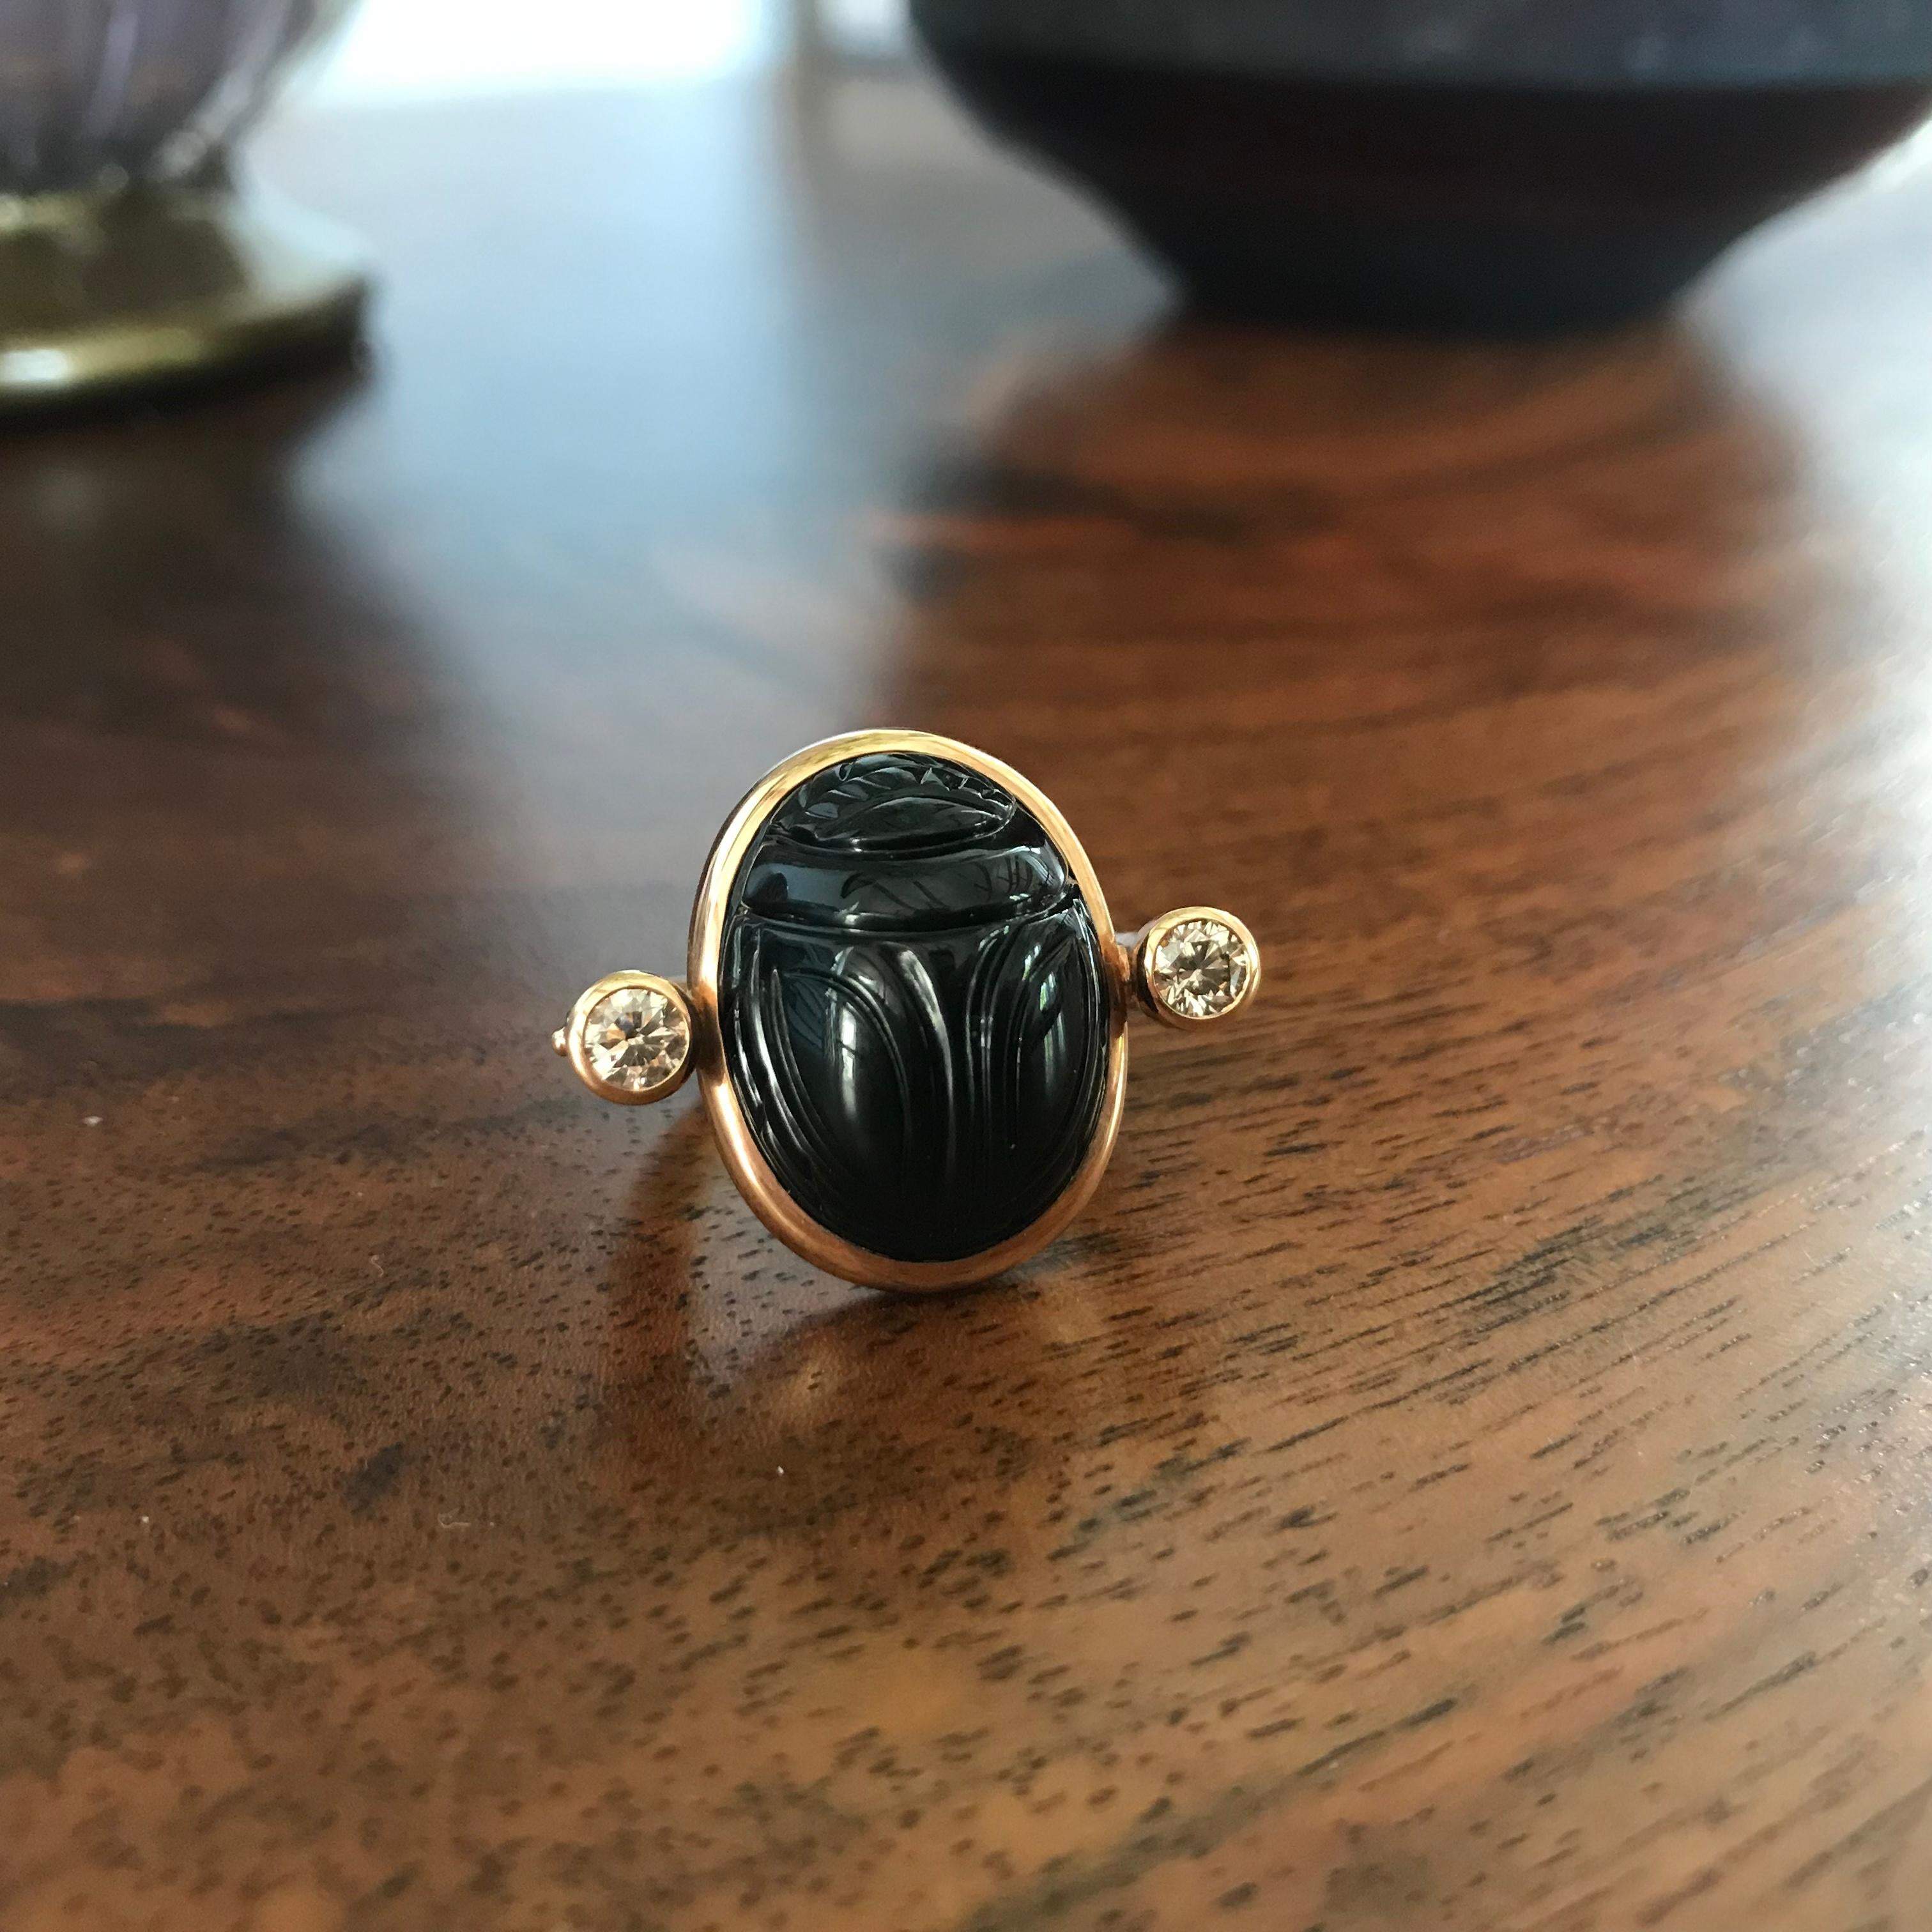 Egyptian Revival Scarab ring in 18 carat rose gold, 1 onyx 20.35 ct, 2 cognac diamonds 0.49 ct